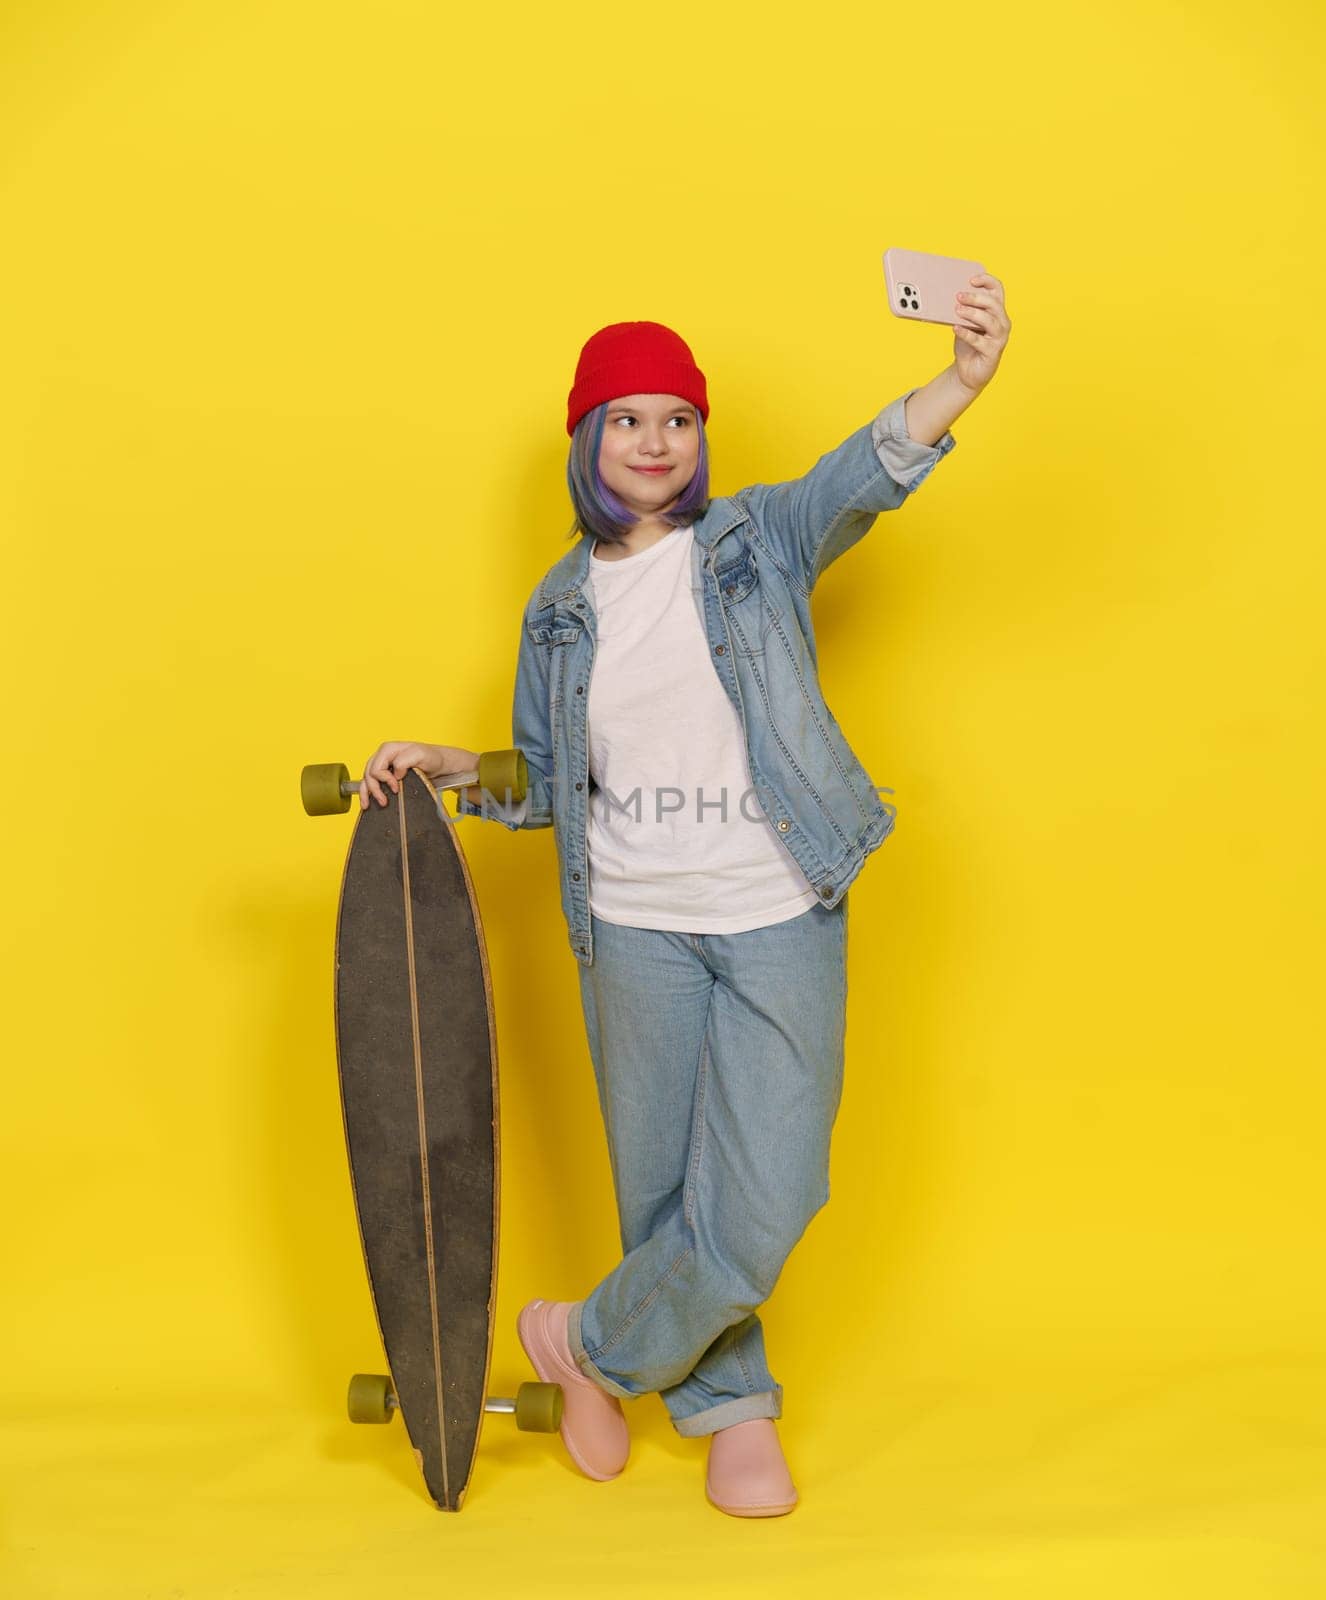 Stylish Teen With Longboard Make Selfie, Girl In Red Hat With Skateboard And Mobile Phone On Yellow Background. Teenager Immersed In Contemporary Lifestyle Of Skateboarding And Digital Connectivity. High quality photo